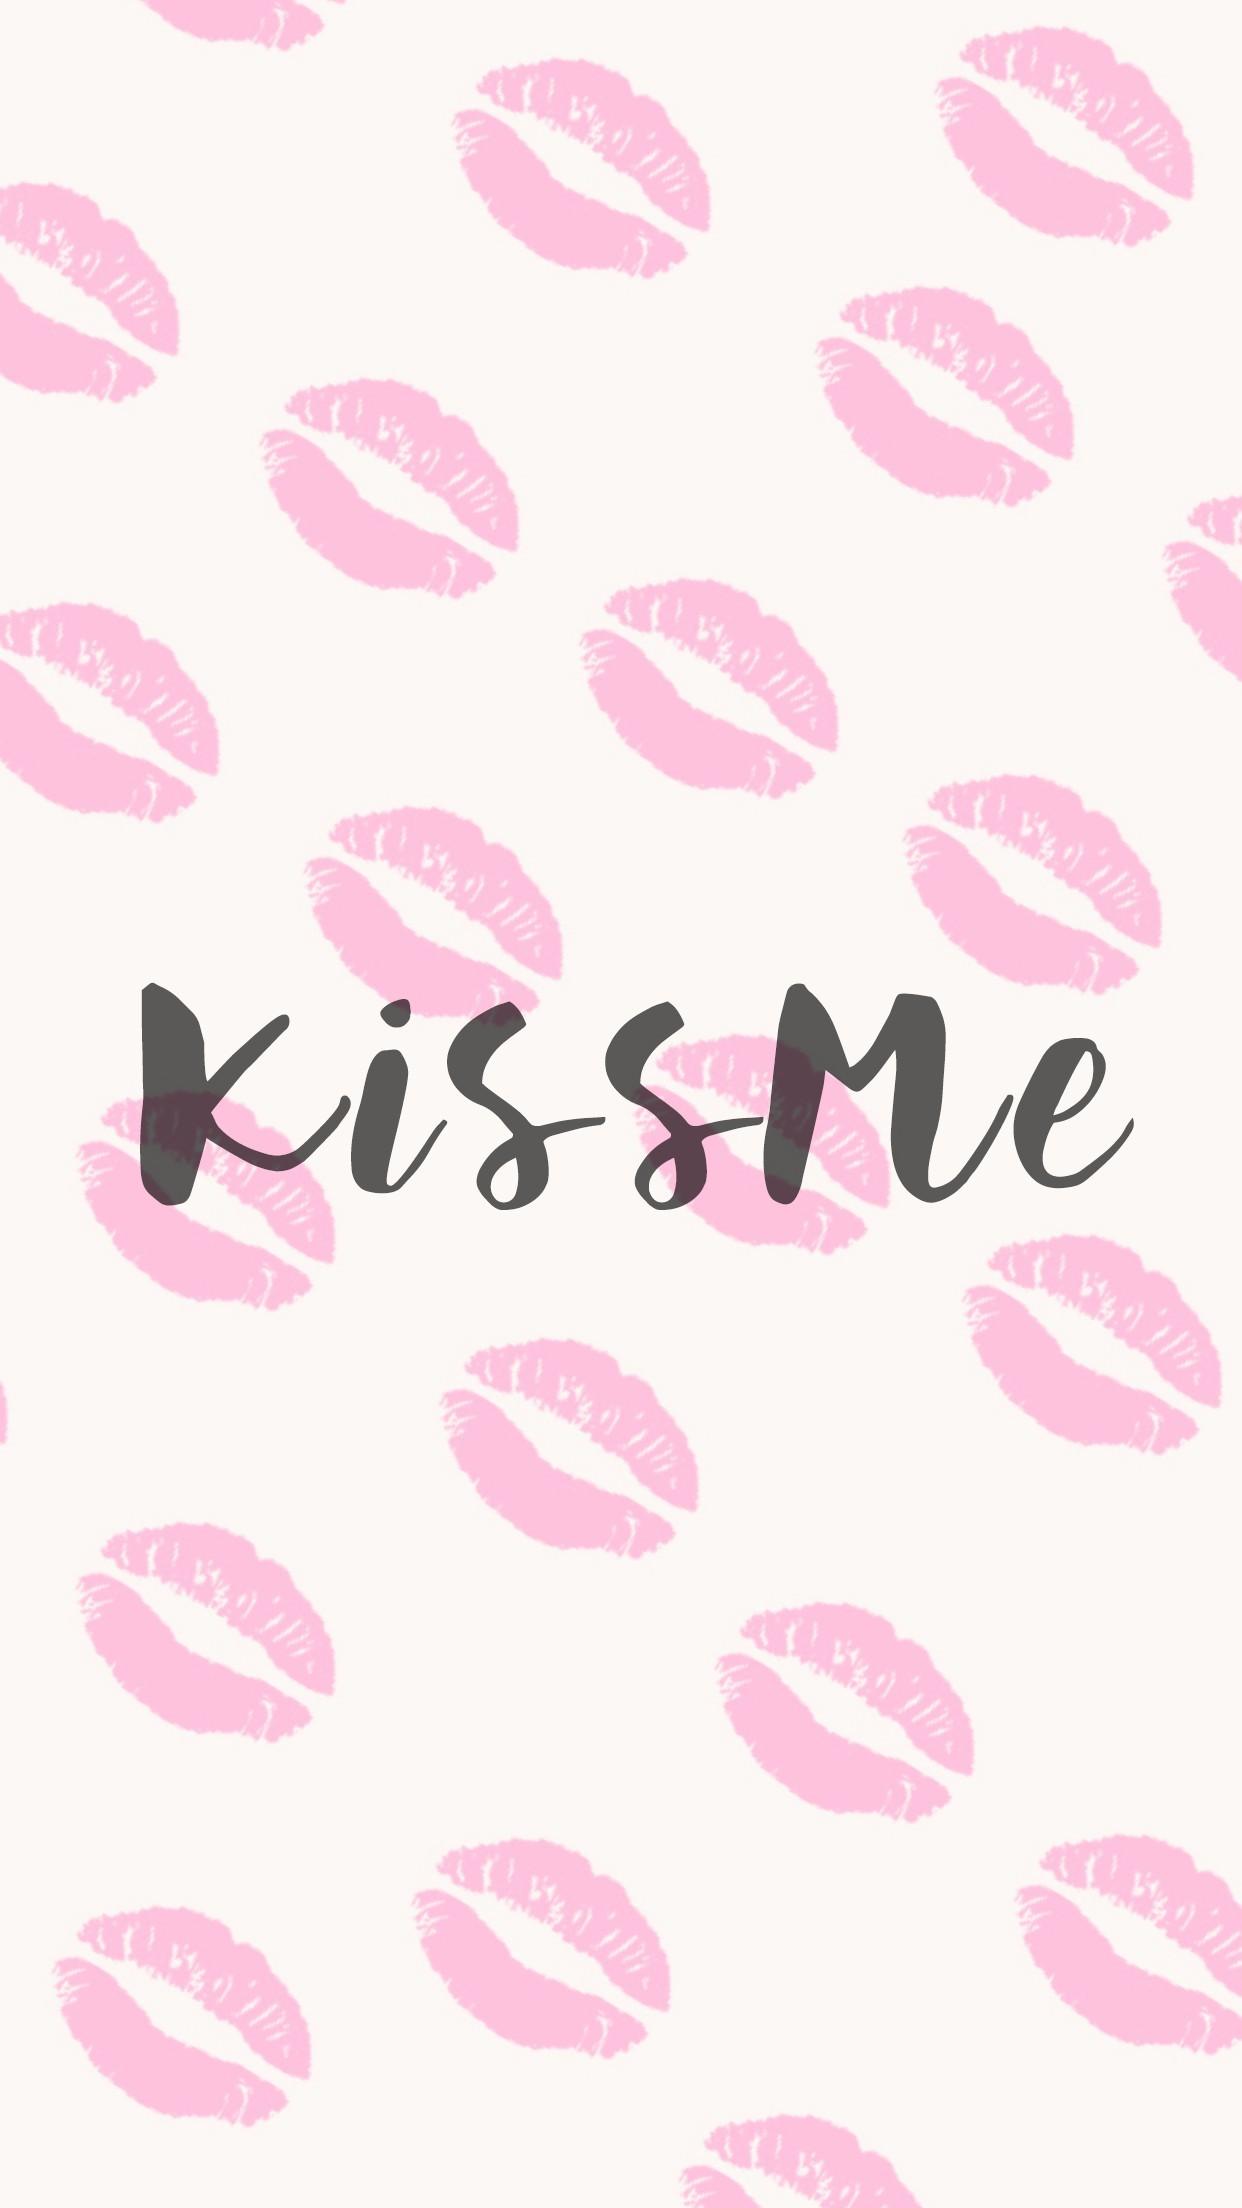 Red lipstick kiss print set black background isolated close up neon light  sexy lips mark makeup collection pink female kisses imprint beauty make  up wallpaper fashion banner love  passion symbol Photos 